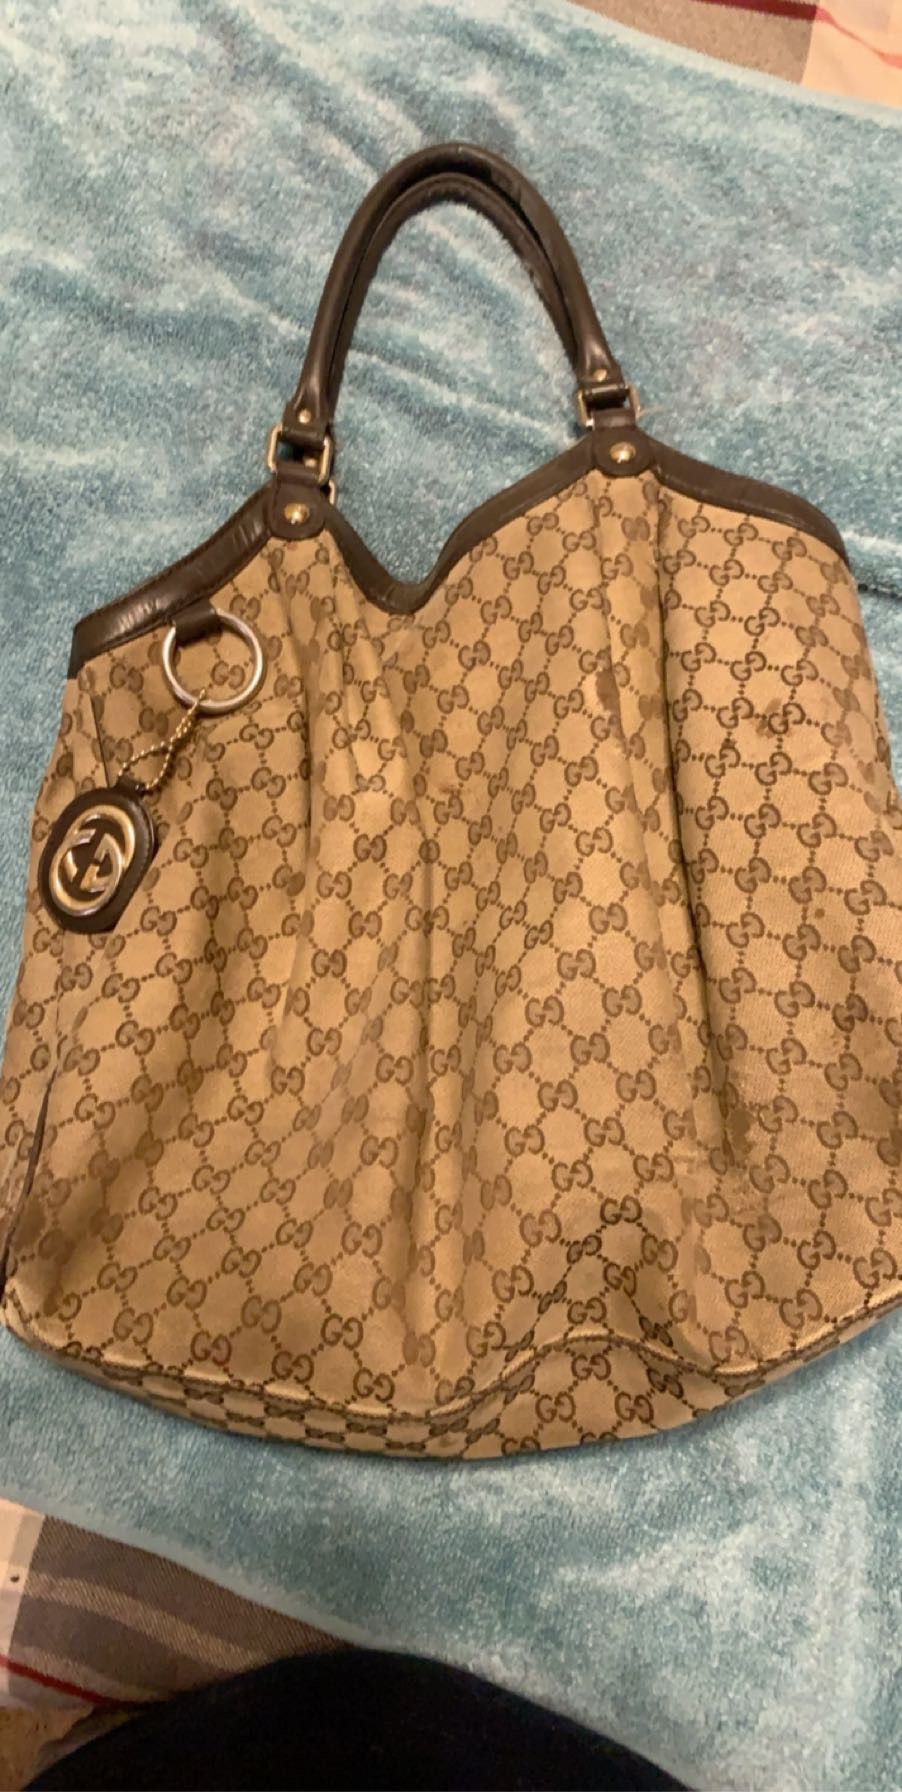 REAL Gucci purse for sale